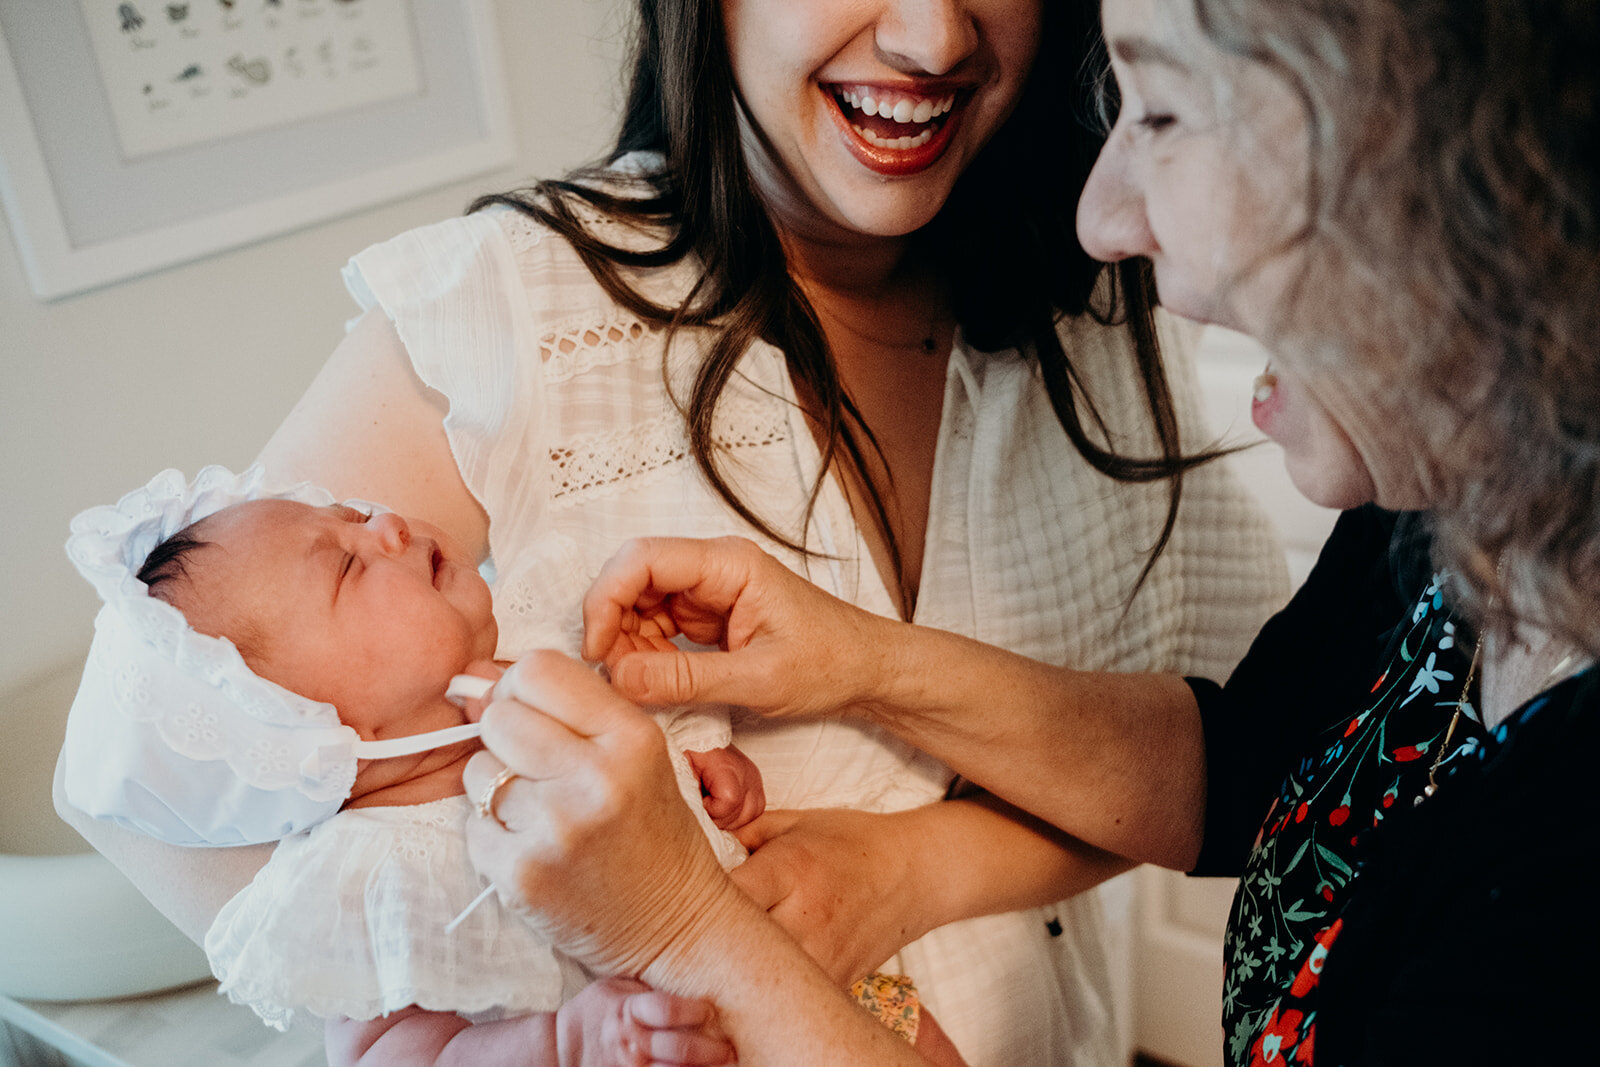 A grandmother puts a bonnet on her granddaughter before her Jewish naming ceremony.